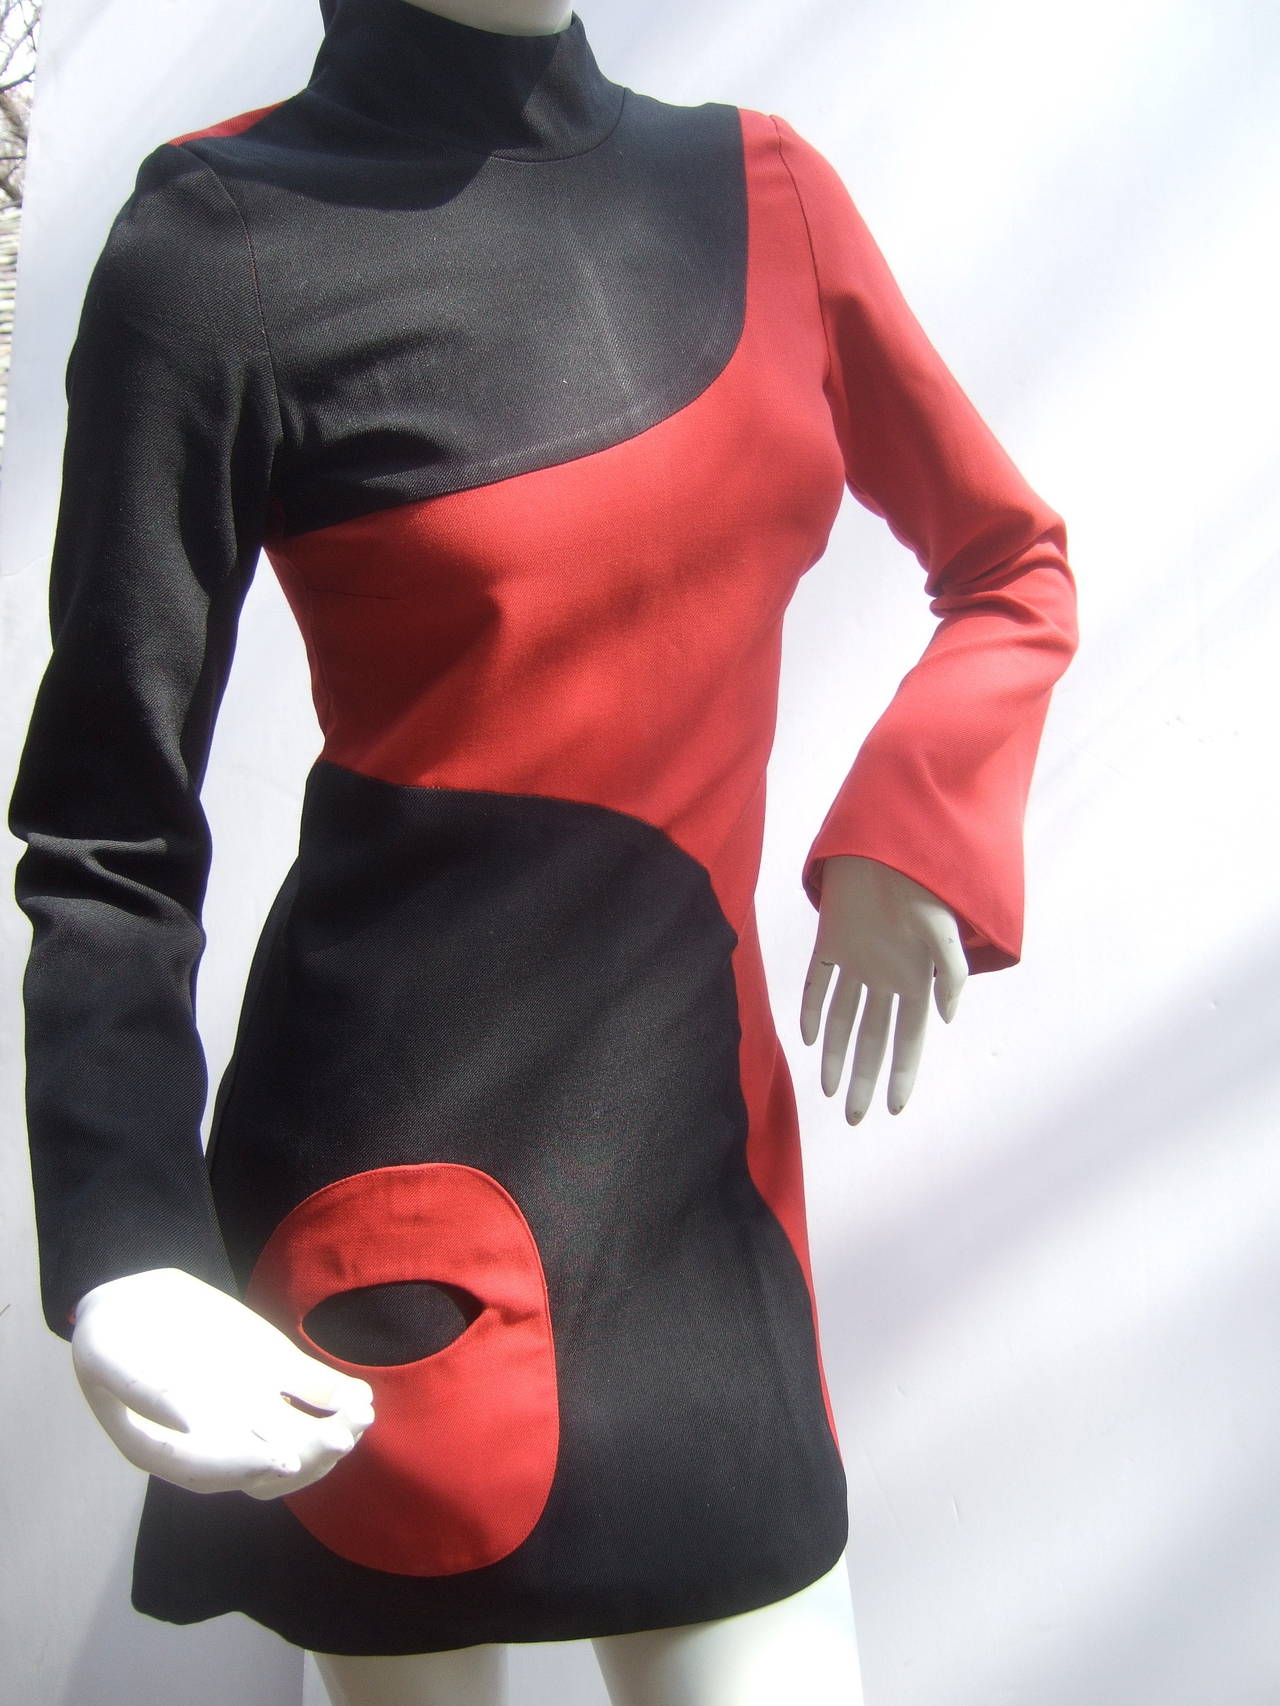 Mod wool tunic / mini dress designed by Marinelli Made in France c 1970
The retro space age design is color blocked with red & black wool panels 
The lower front section of the dress is designed with an oval shaped 
circular pocket

The